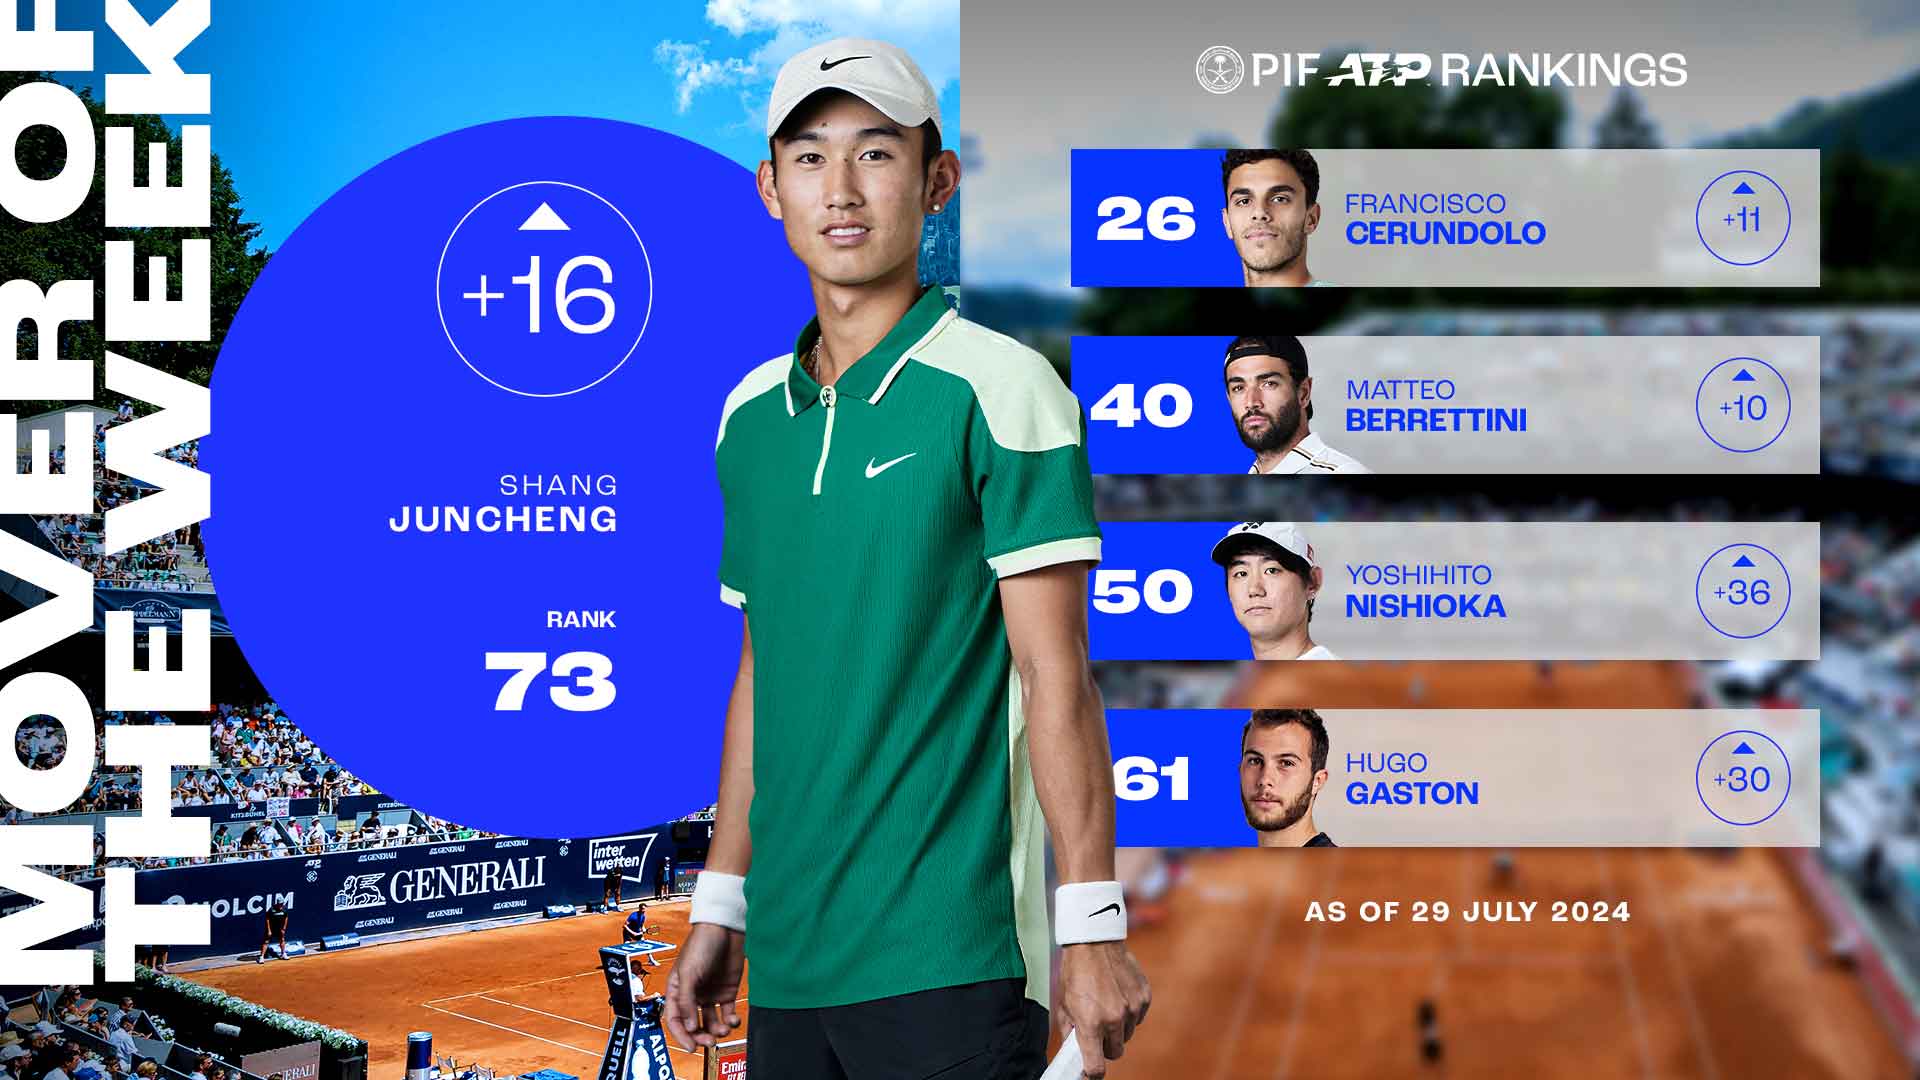 Shang Juncheng is up 16 spots to a career-high in the PIF ATP Rankings.